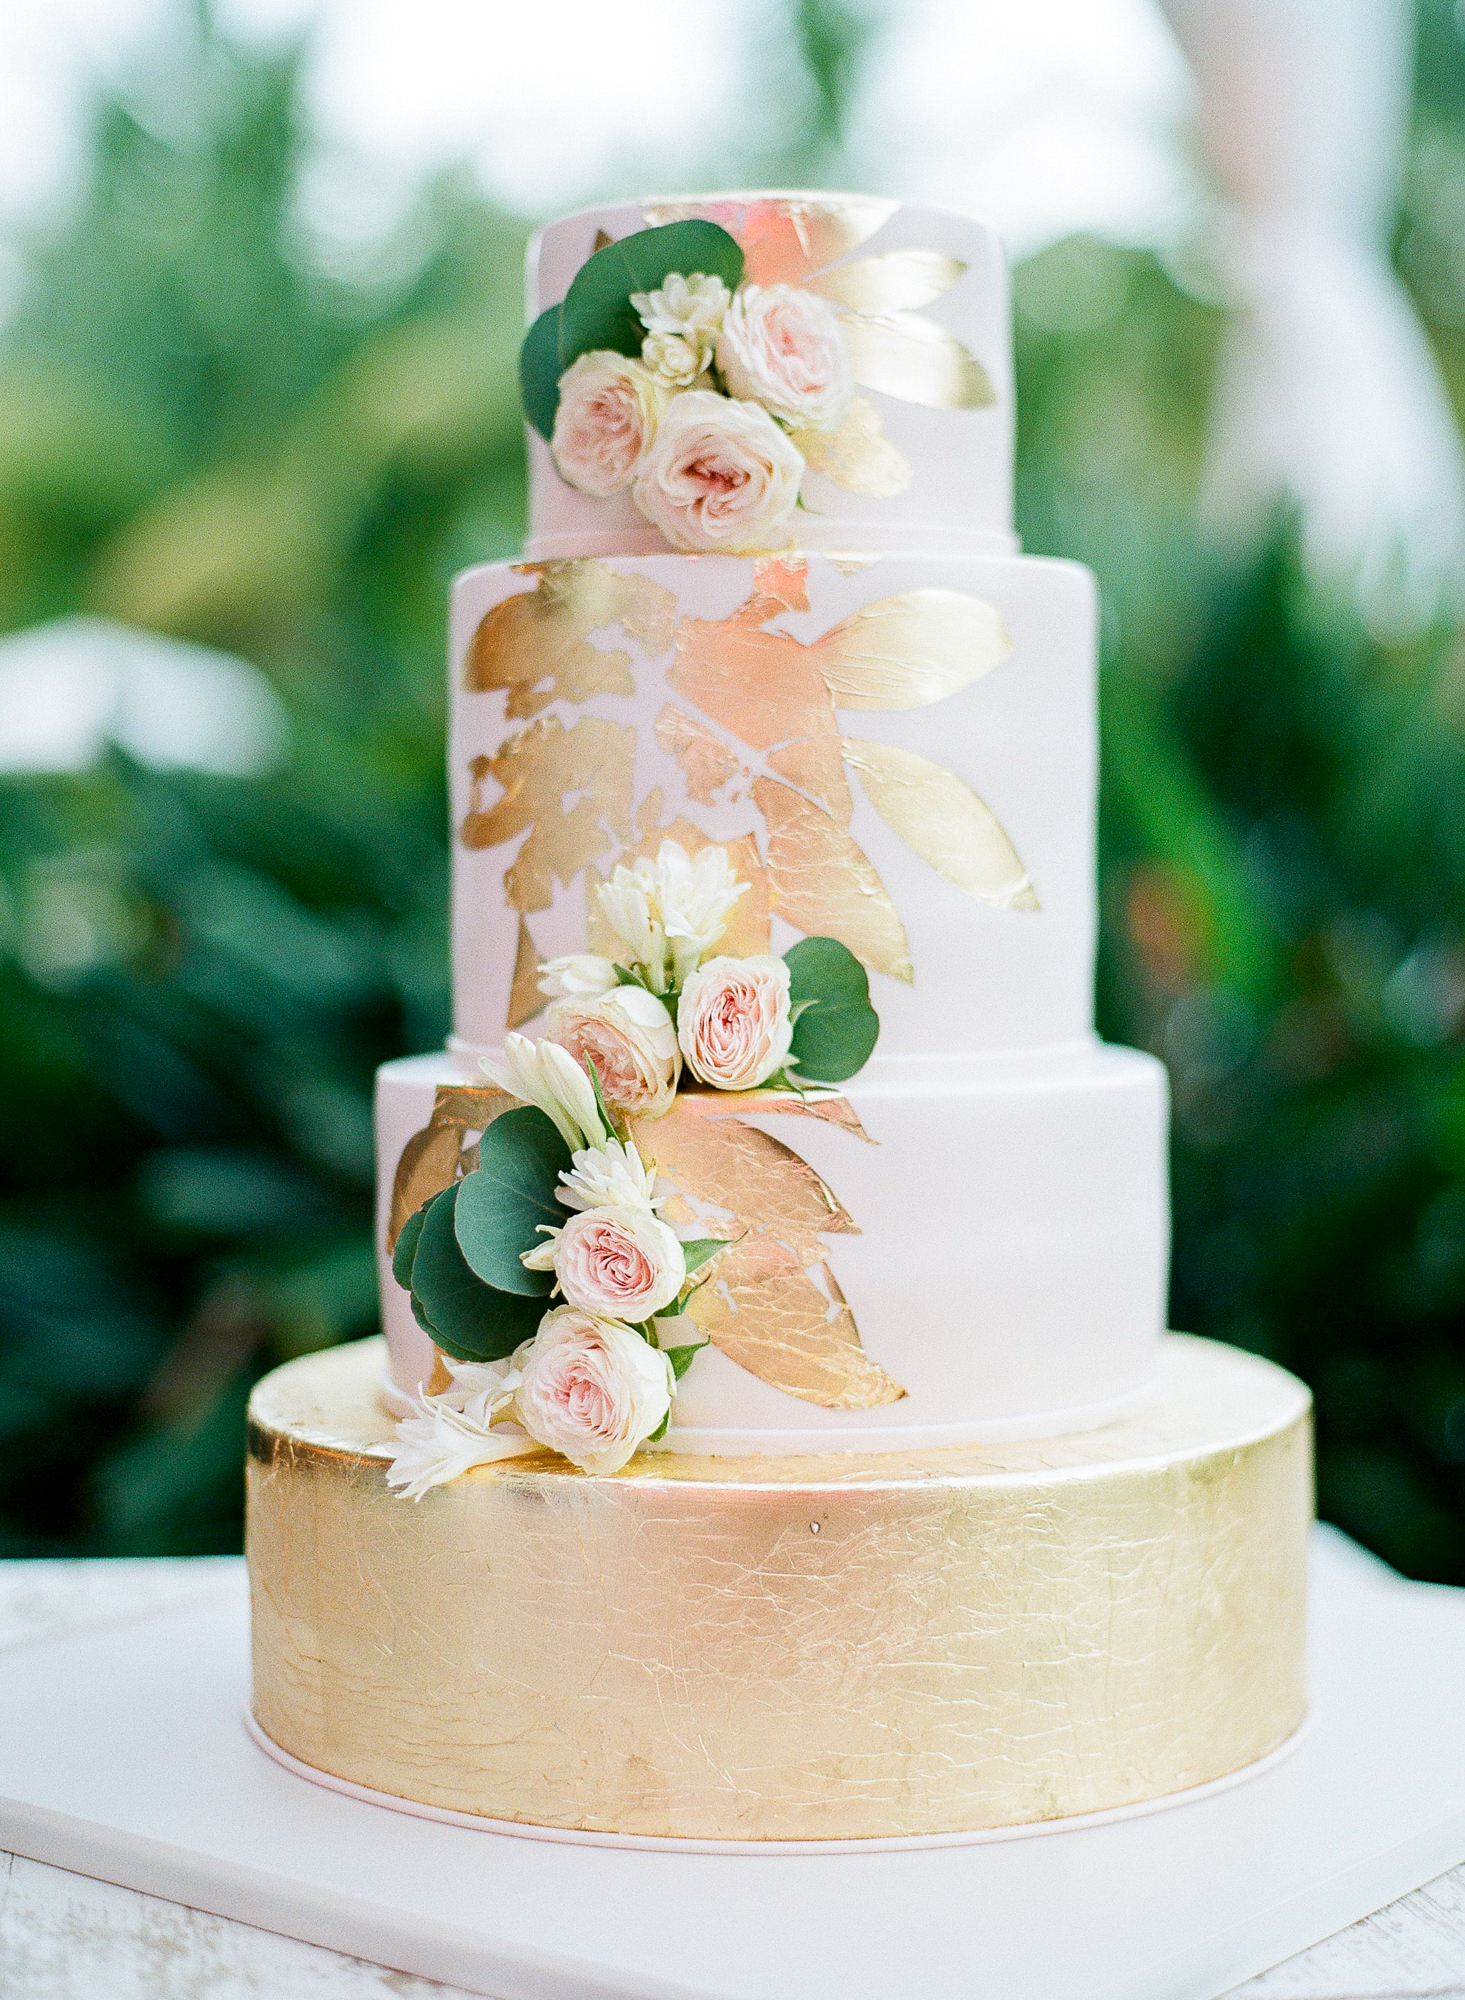 Pink and gold wedding cake. This cake was designed by Elegant Temptations and featured blush fondant, edible gold foil, and real flowers. Guests enjoyed the vanilla rum and coconut flavors